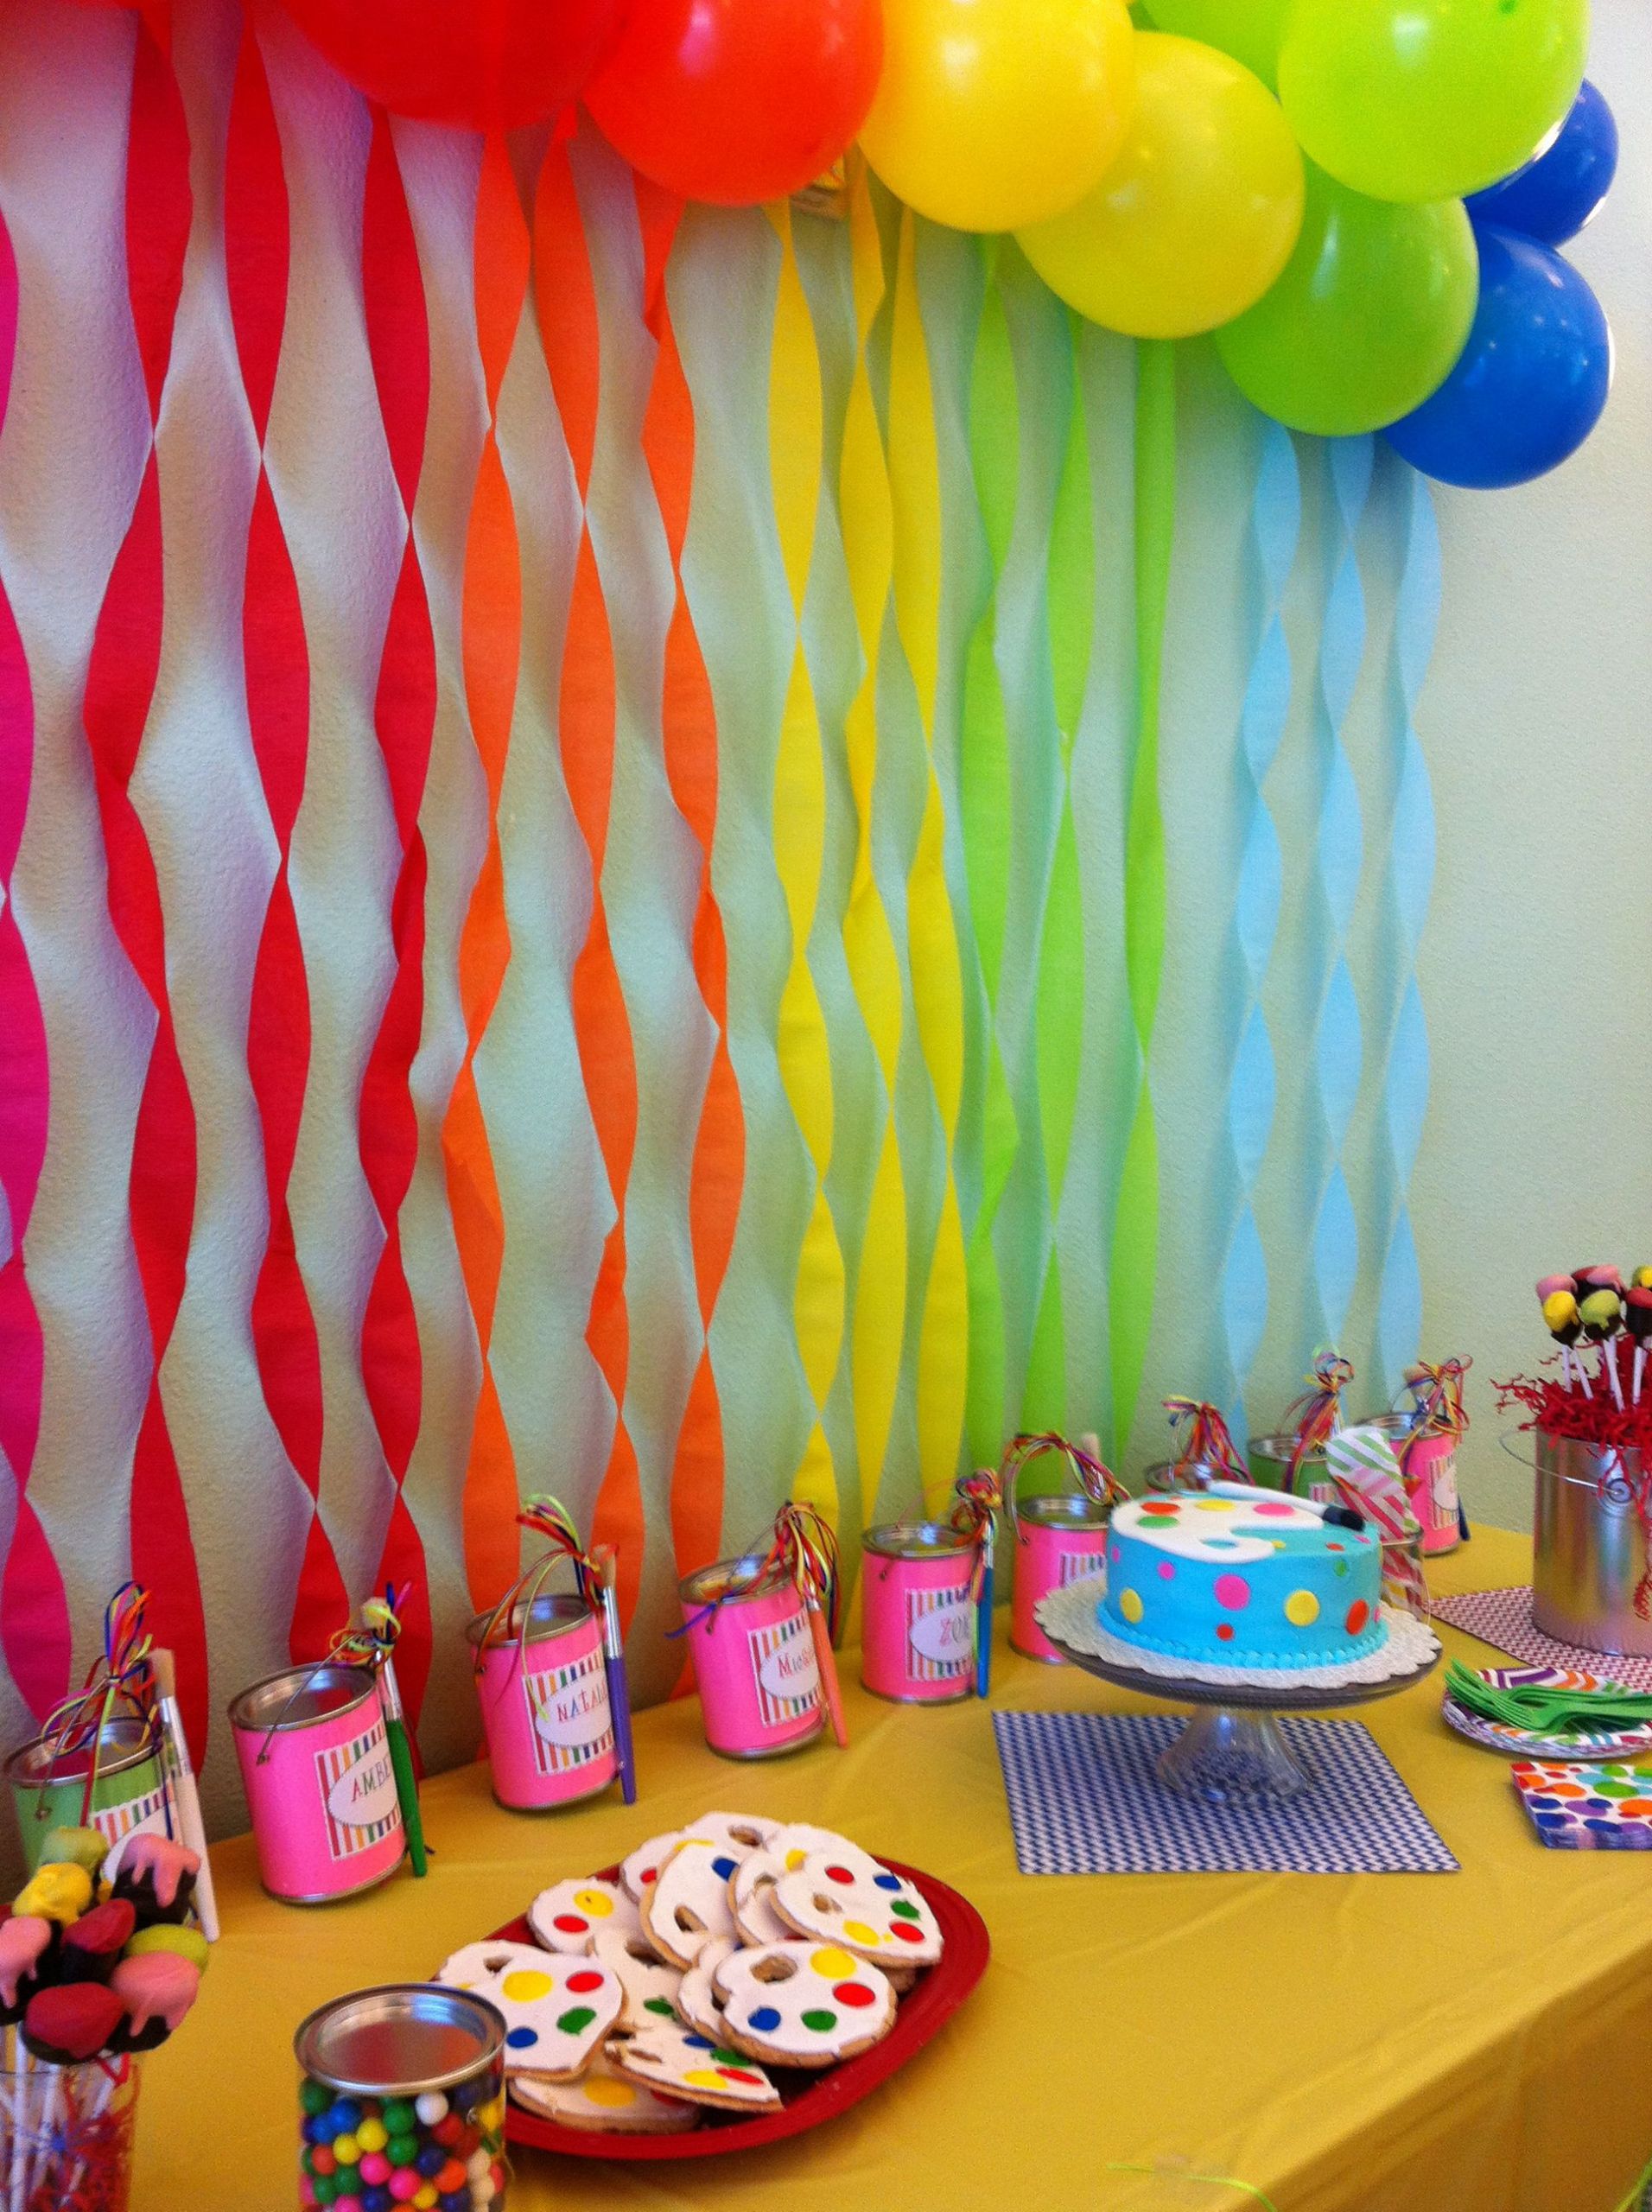 Birthday Party Ideas For 11 Year Old Daughter
 8 year old girl birthday art party in 2019